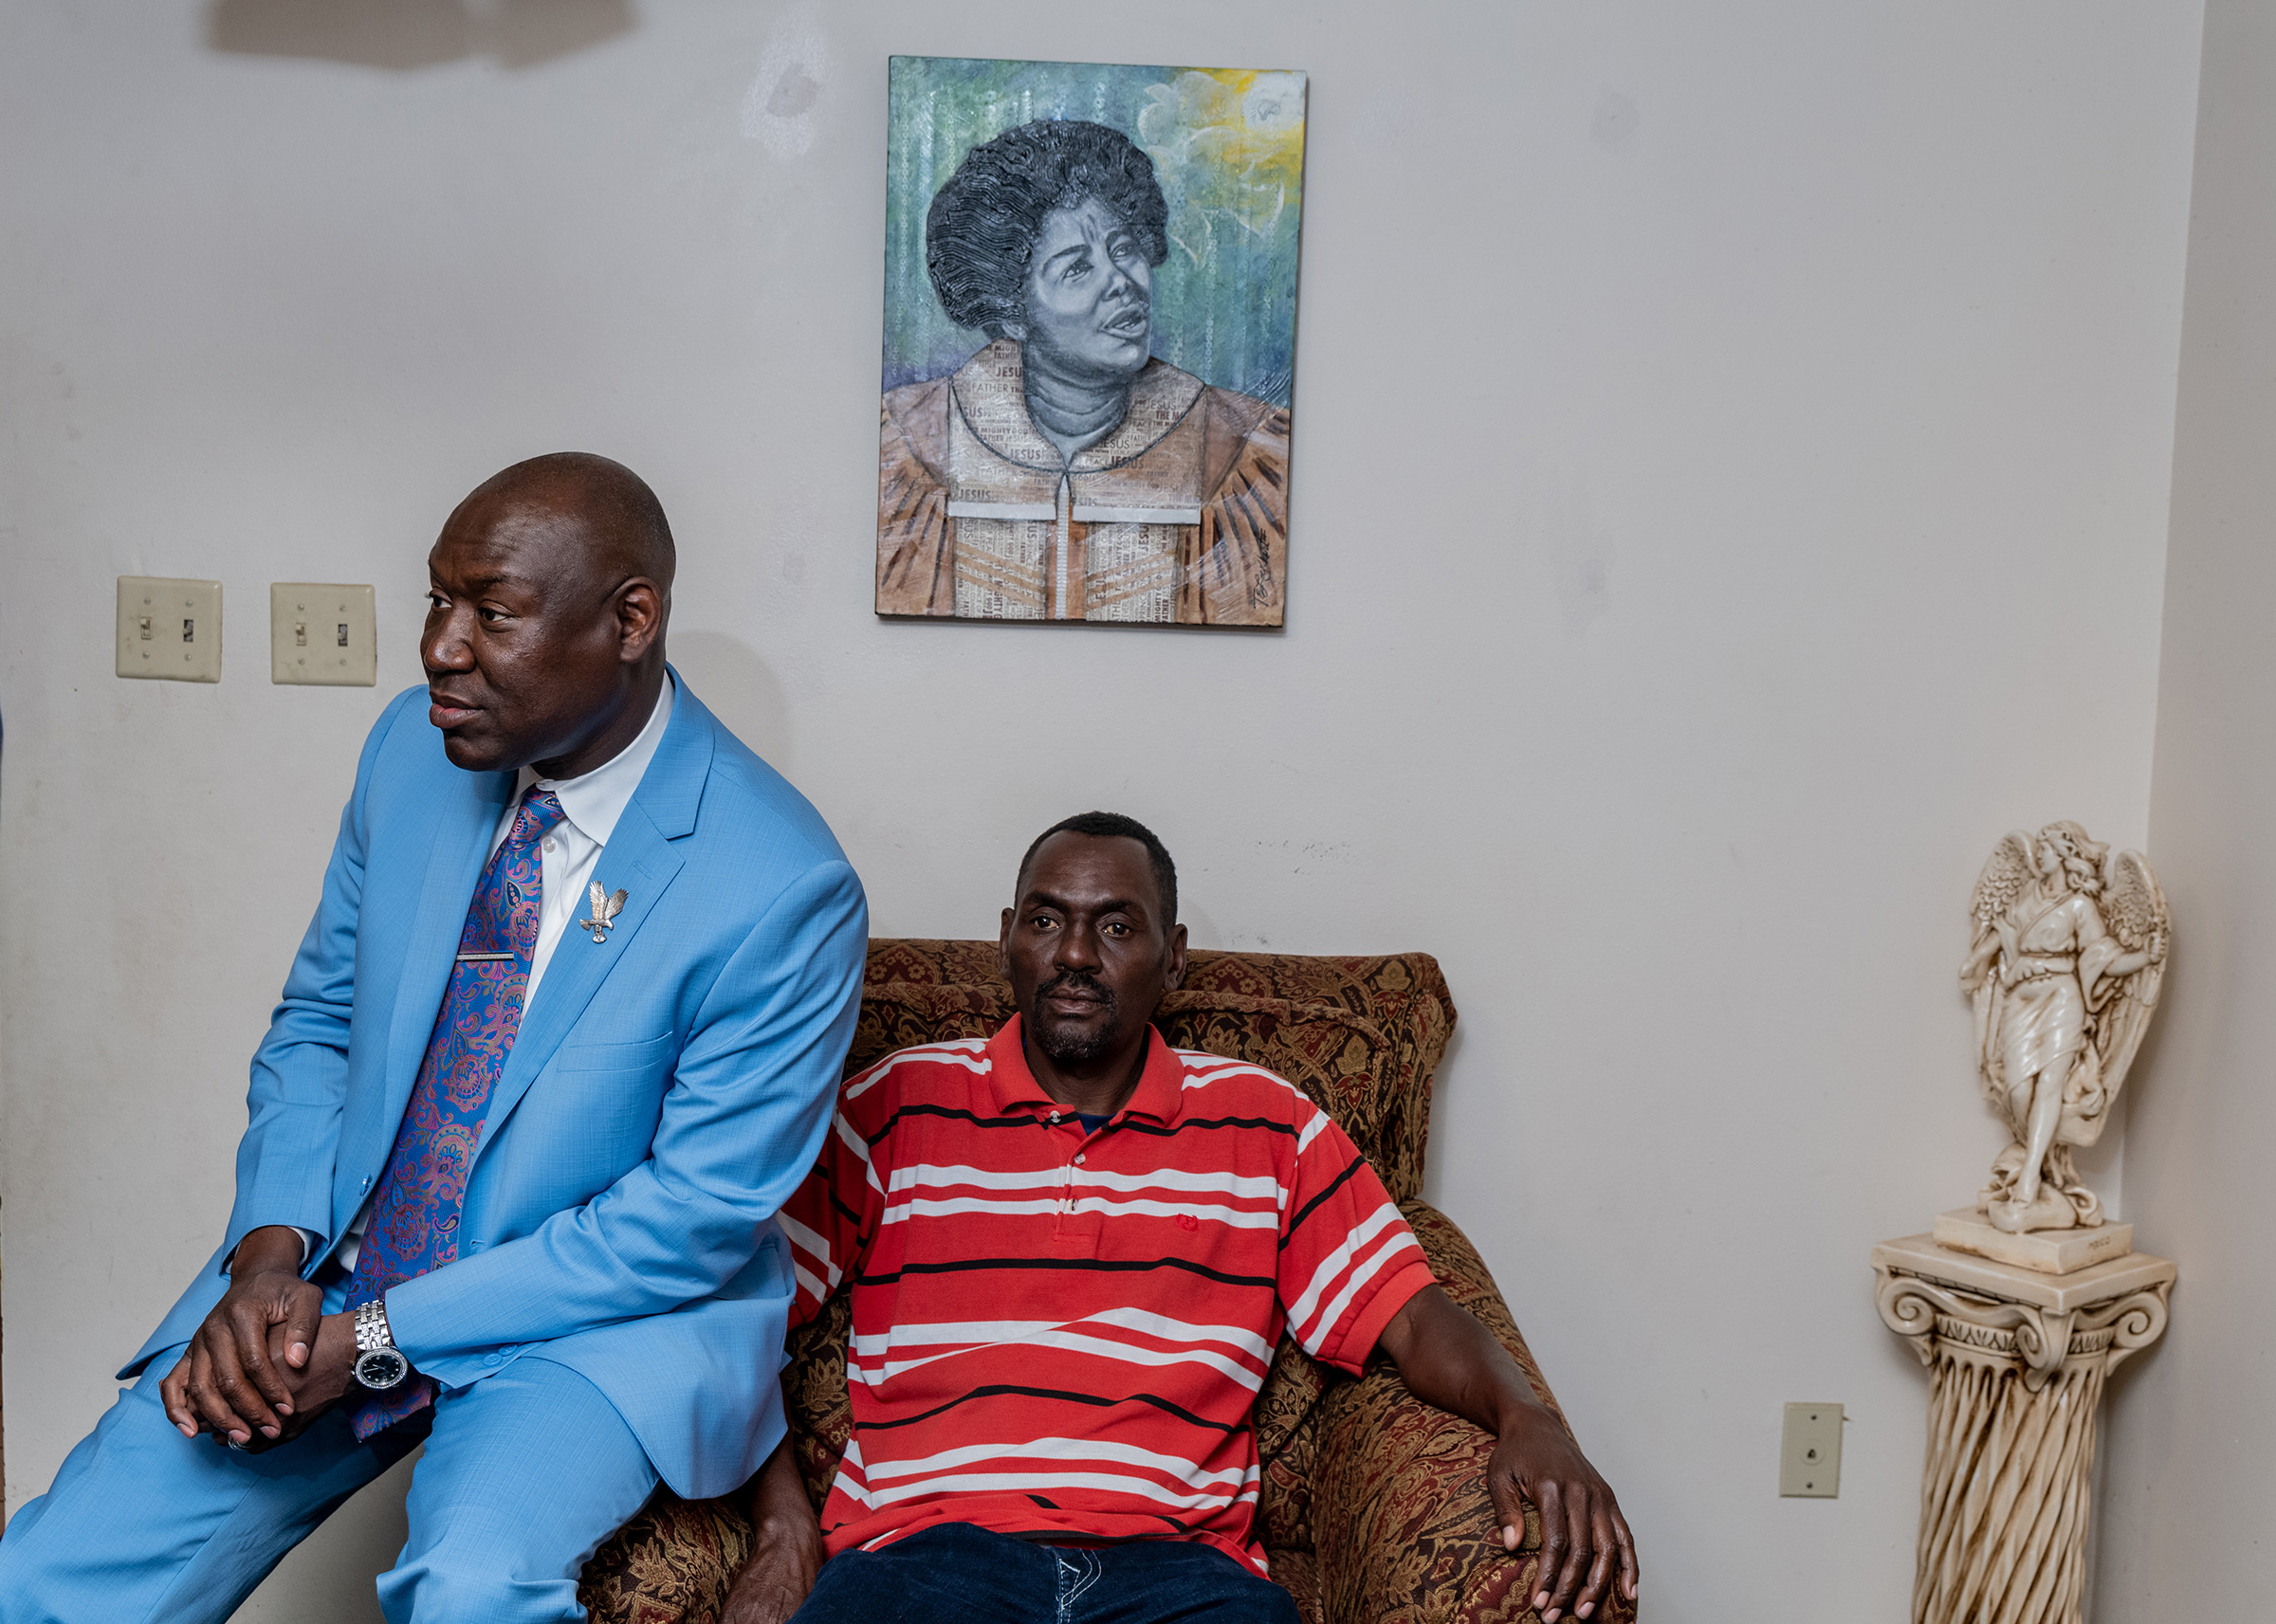 Crump sits with his Uncle Harold at his Mother's home in Tallahassee, Fla., on April 4. (Ruddy Roye for TIME)